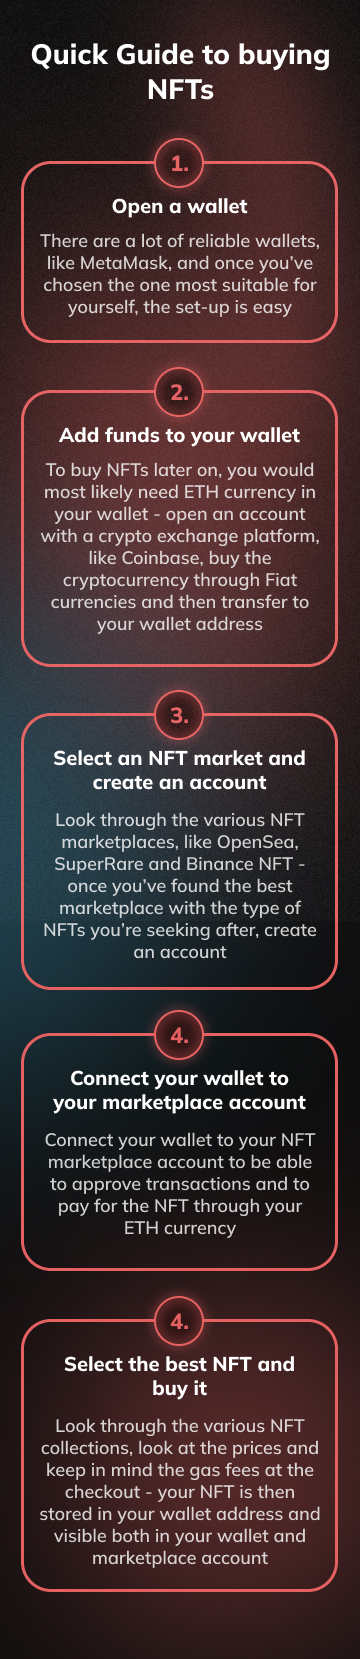 Quick Guide to Buying NFTs (mobile)